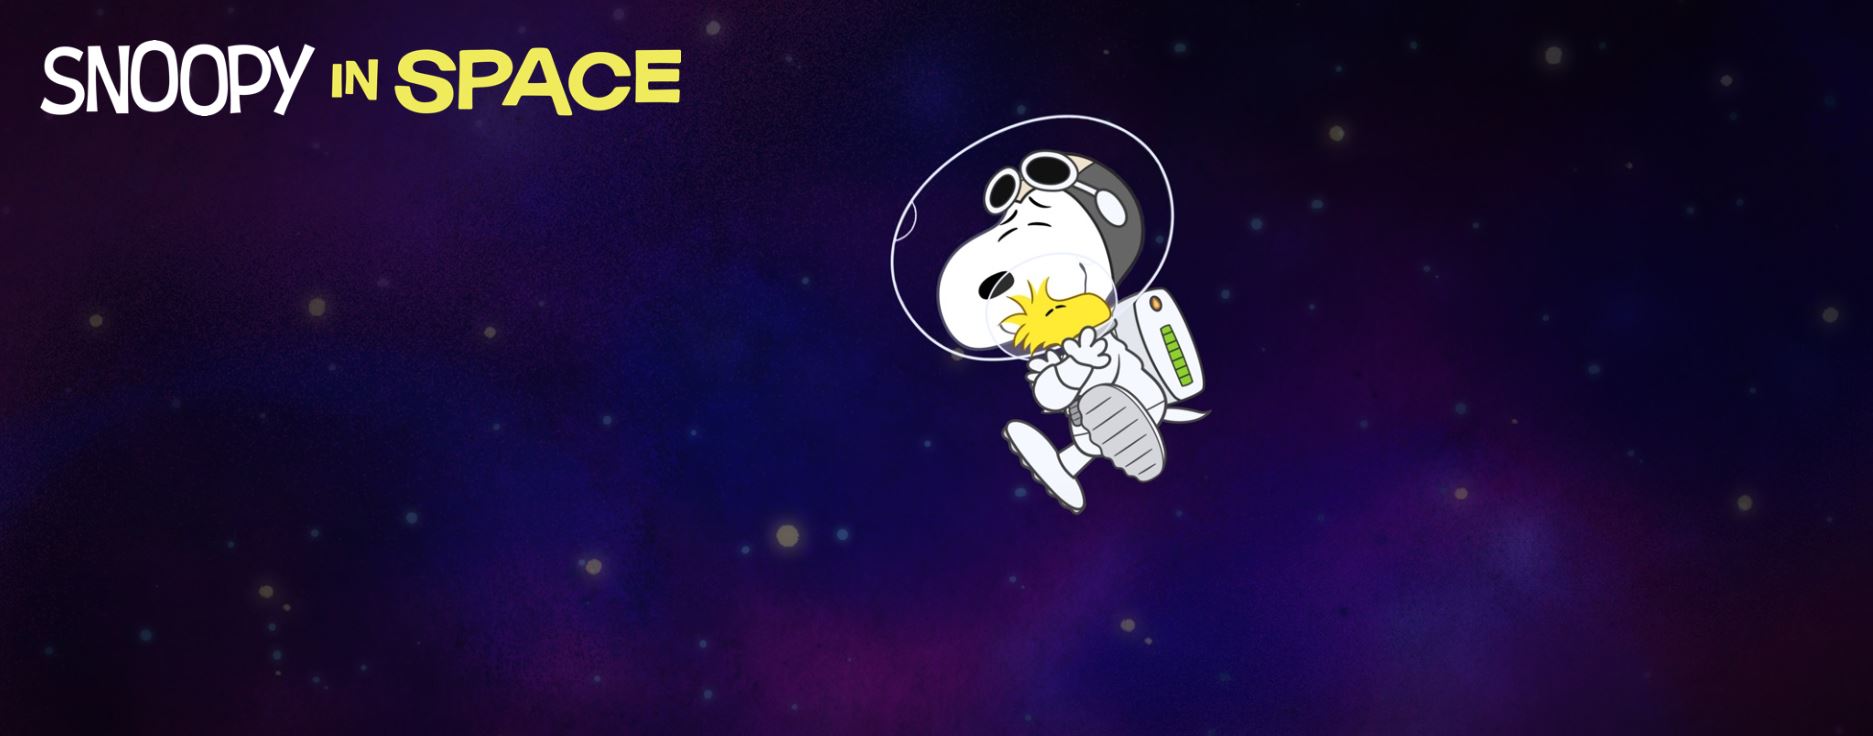 title card of snoopy in space from apple tv+